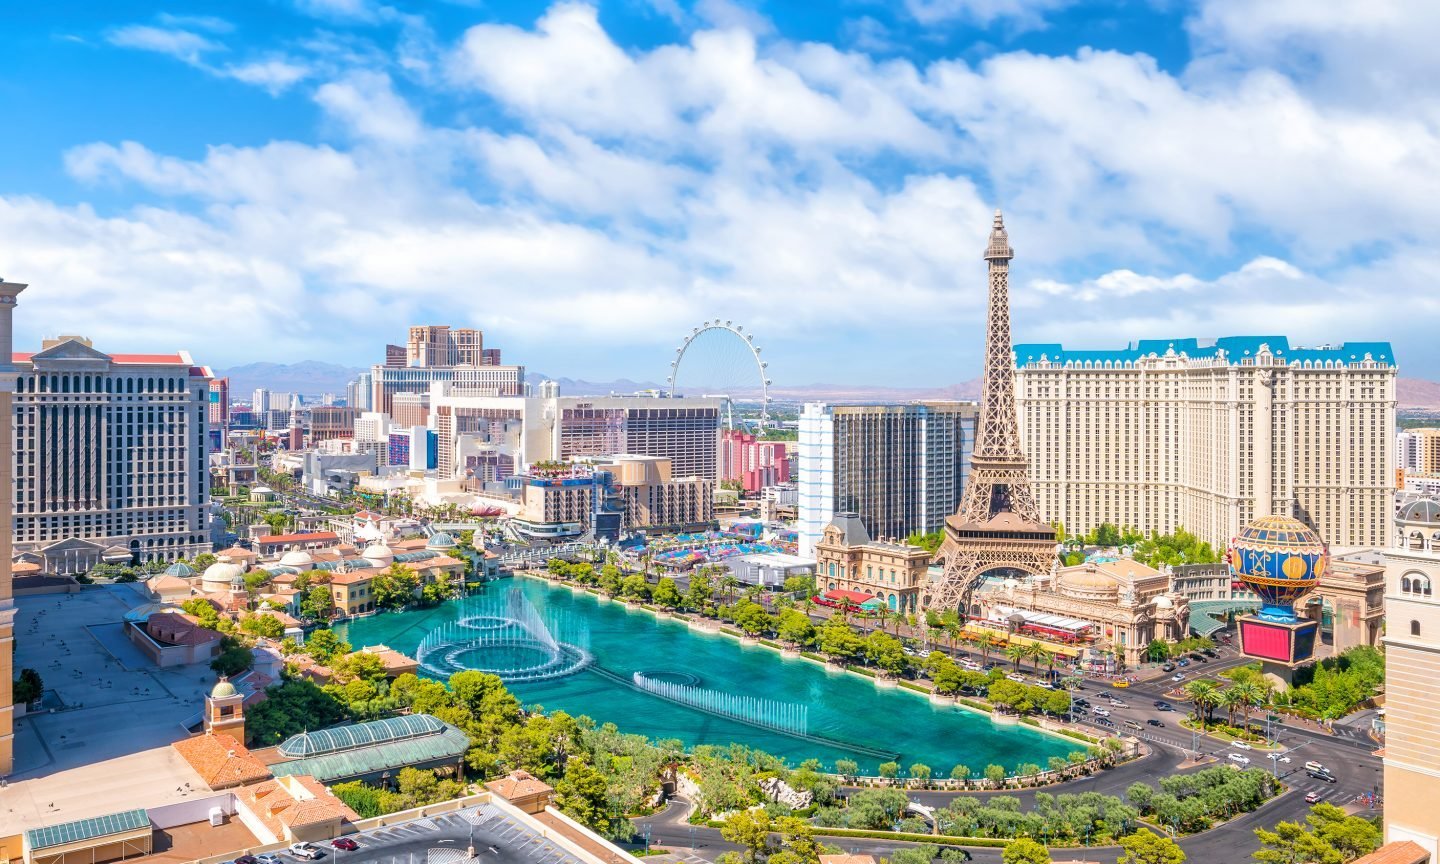 How to Travel to Las Vegas on Points and Miles